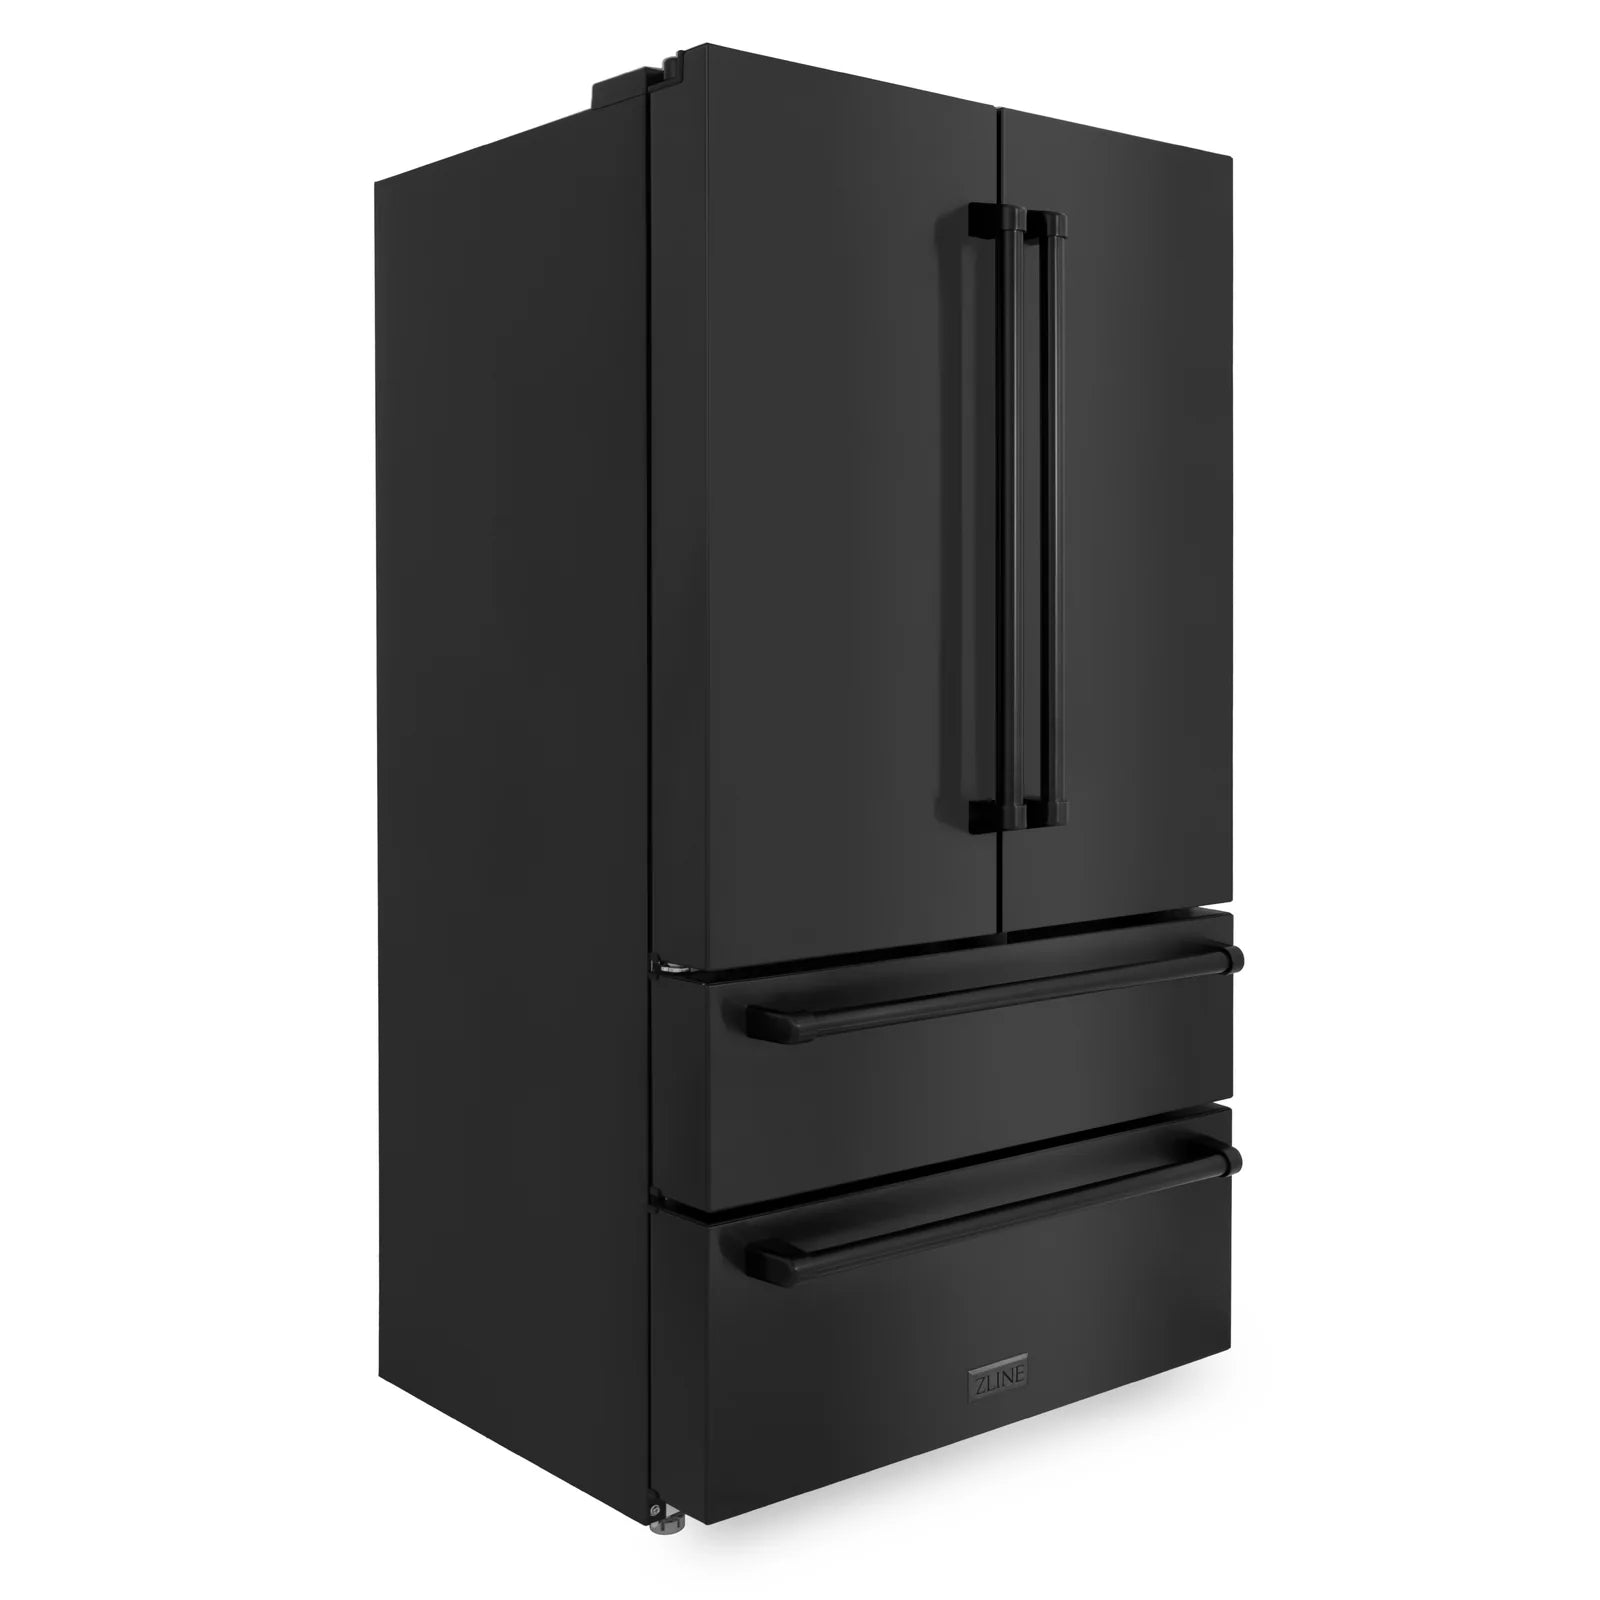 ZLINE 36-Inch 22.5 cu. ft Freestanding French Door Refrigerator with Ice Maker and Water Filter in Fingerprint Resistant Black Stainless Steel - RFM-36-WF-BS